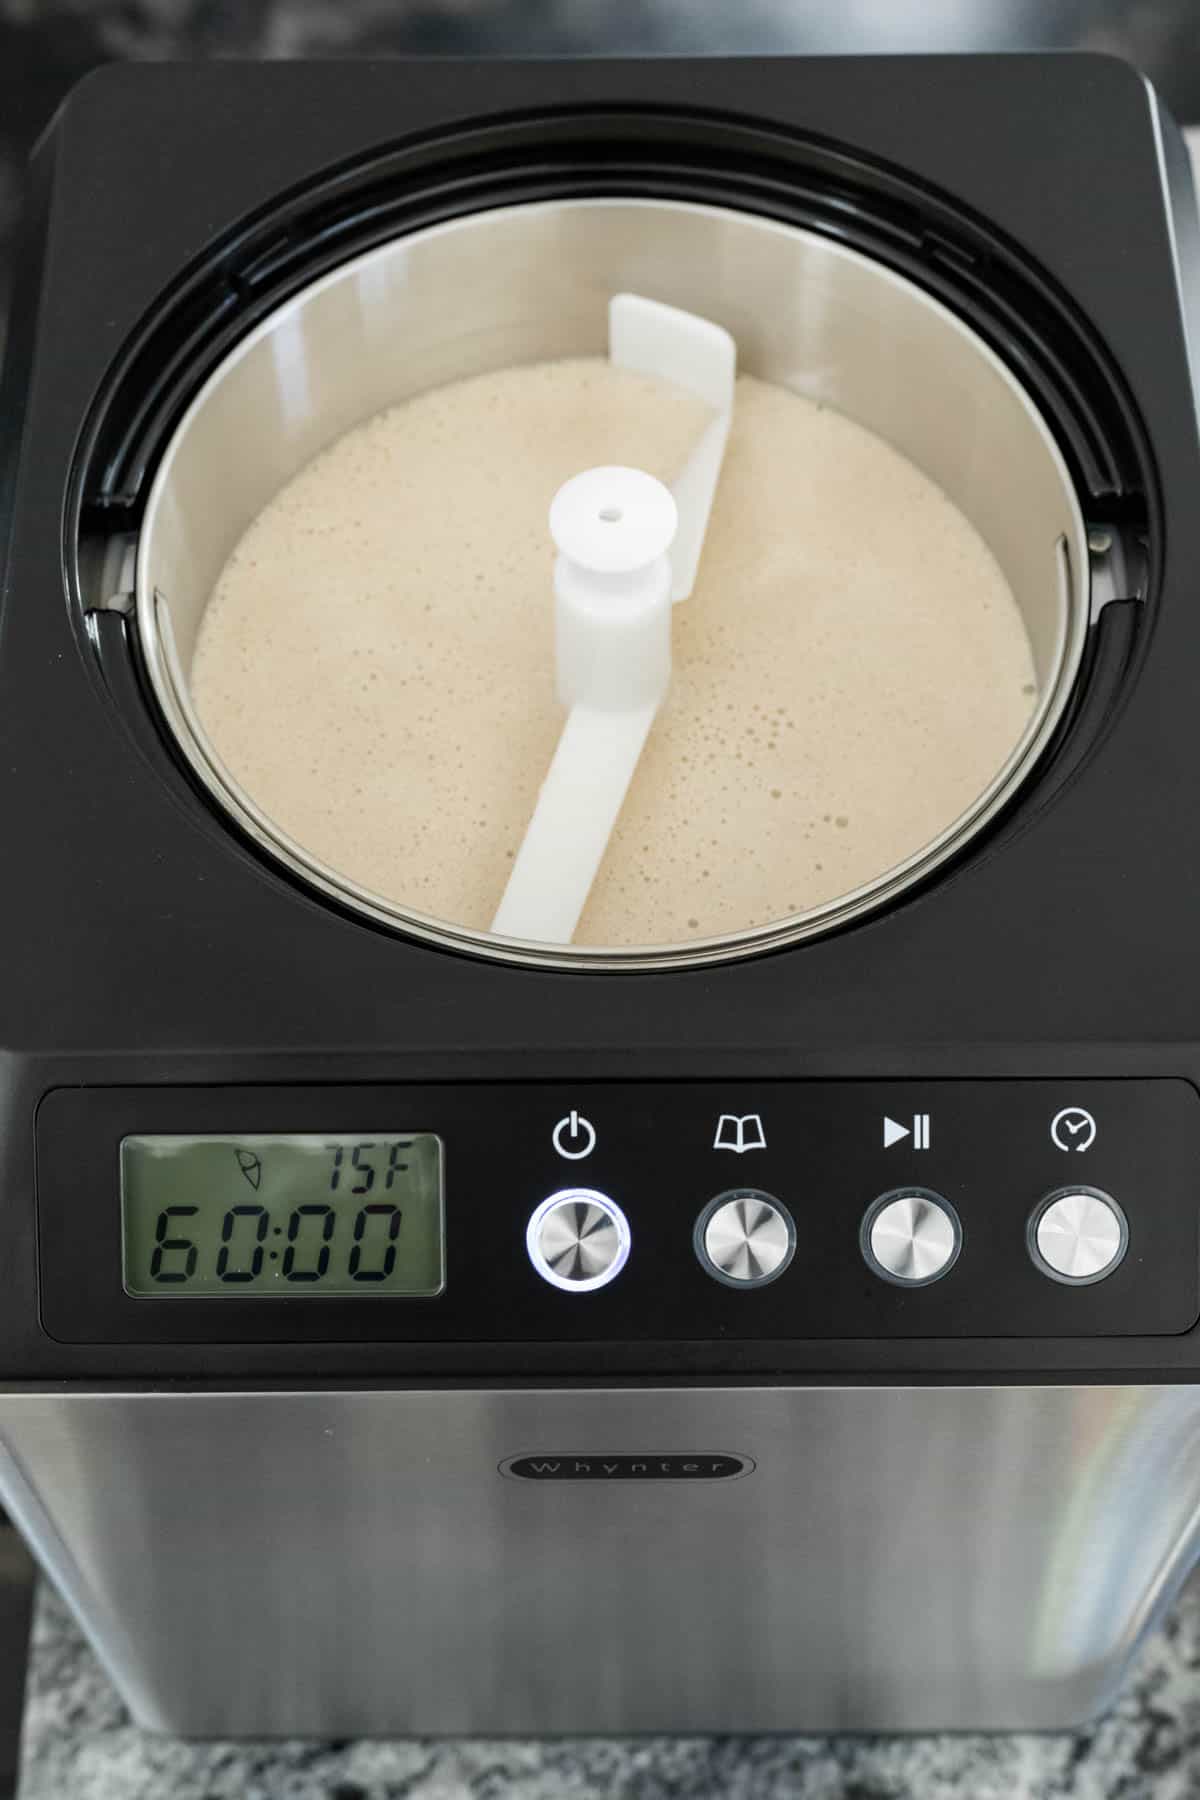 Vegan ice cream mixture poured into the bowl of an ice cream maker.